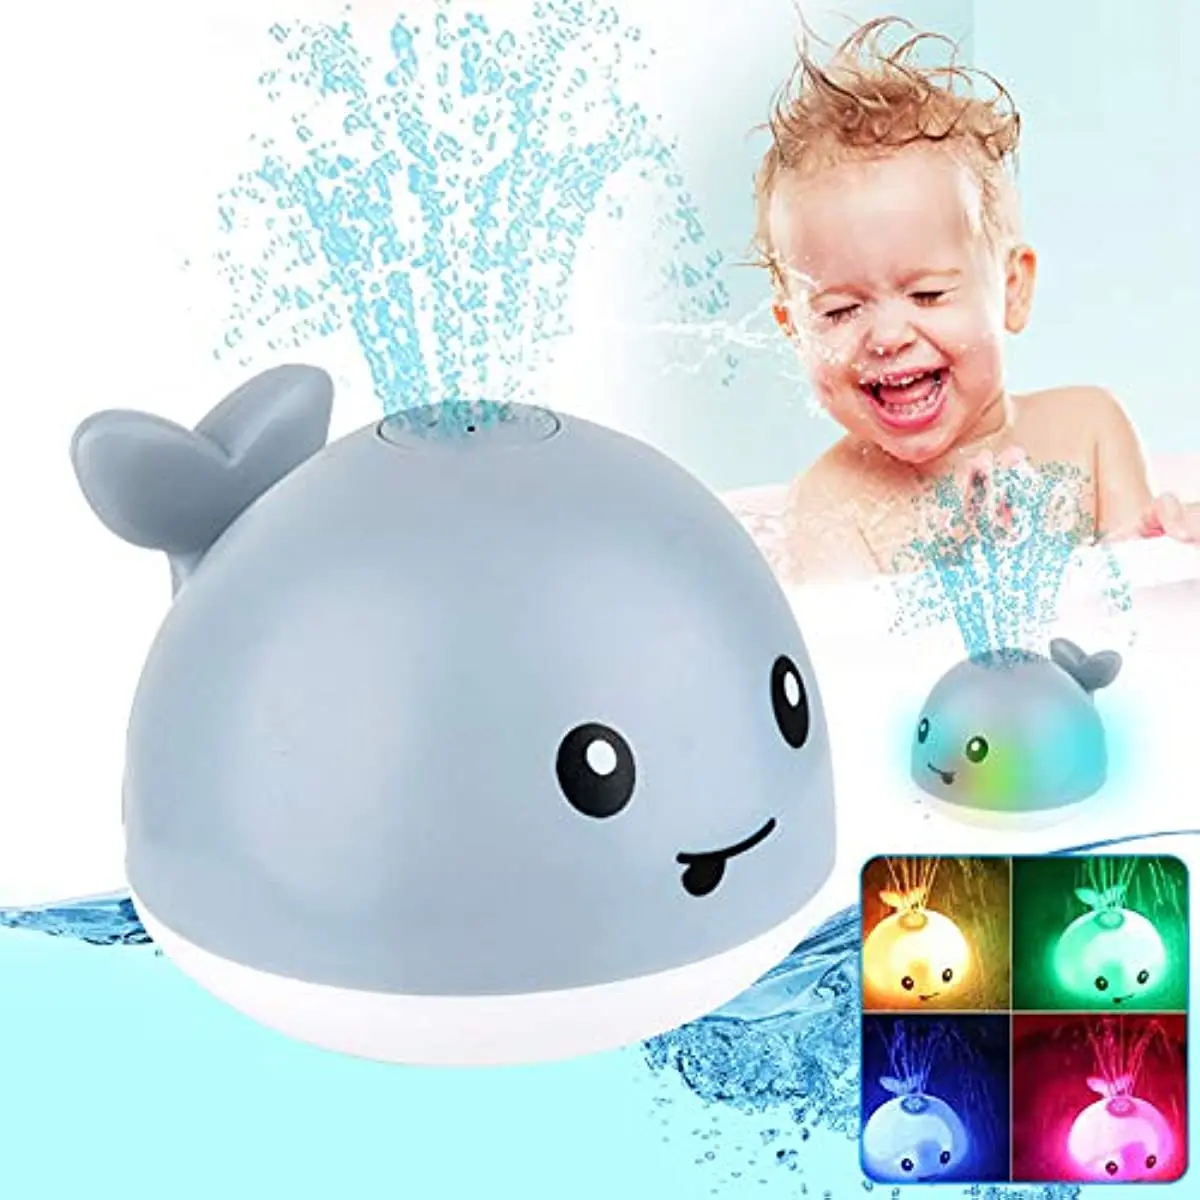 

Baby Bath Toys Light Up Baby Pool Toy with LED Light Whale Spray for Toddlers Kids Induction Sprinkler Bathtub Swimming Pool Toy